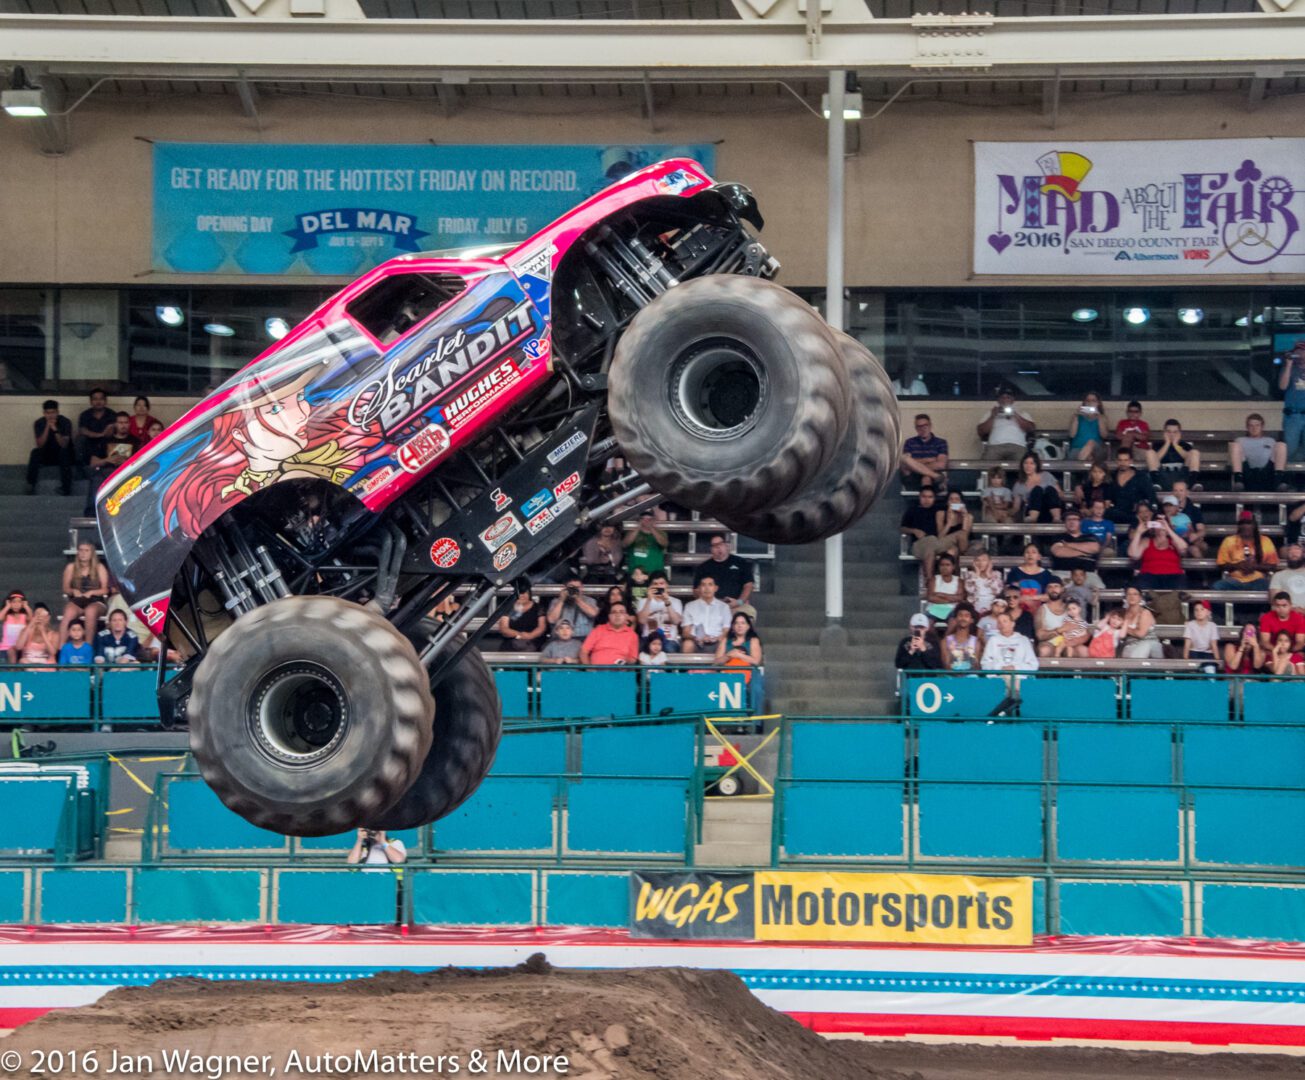 Monster truck at the 2016 San Diego County Fair